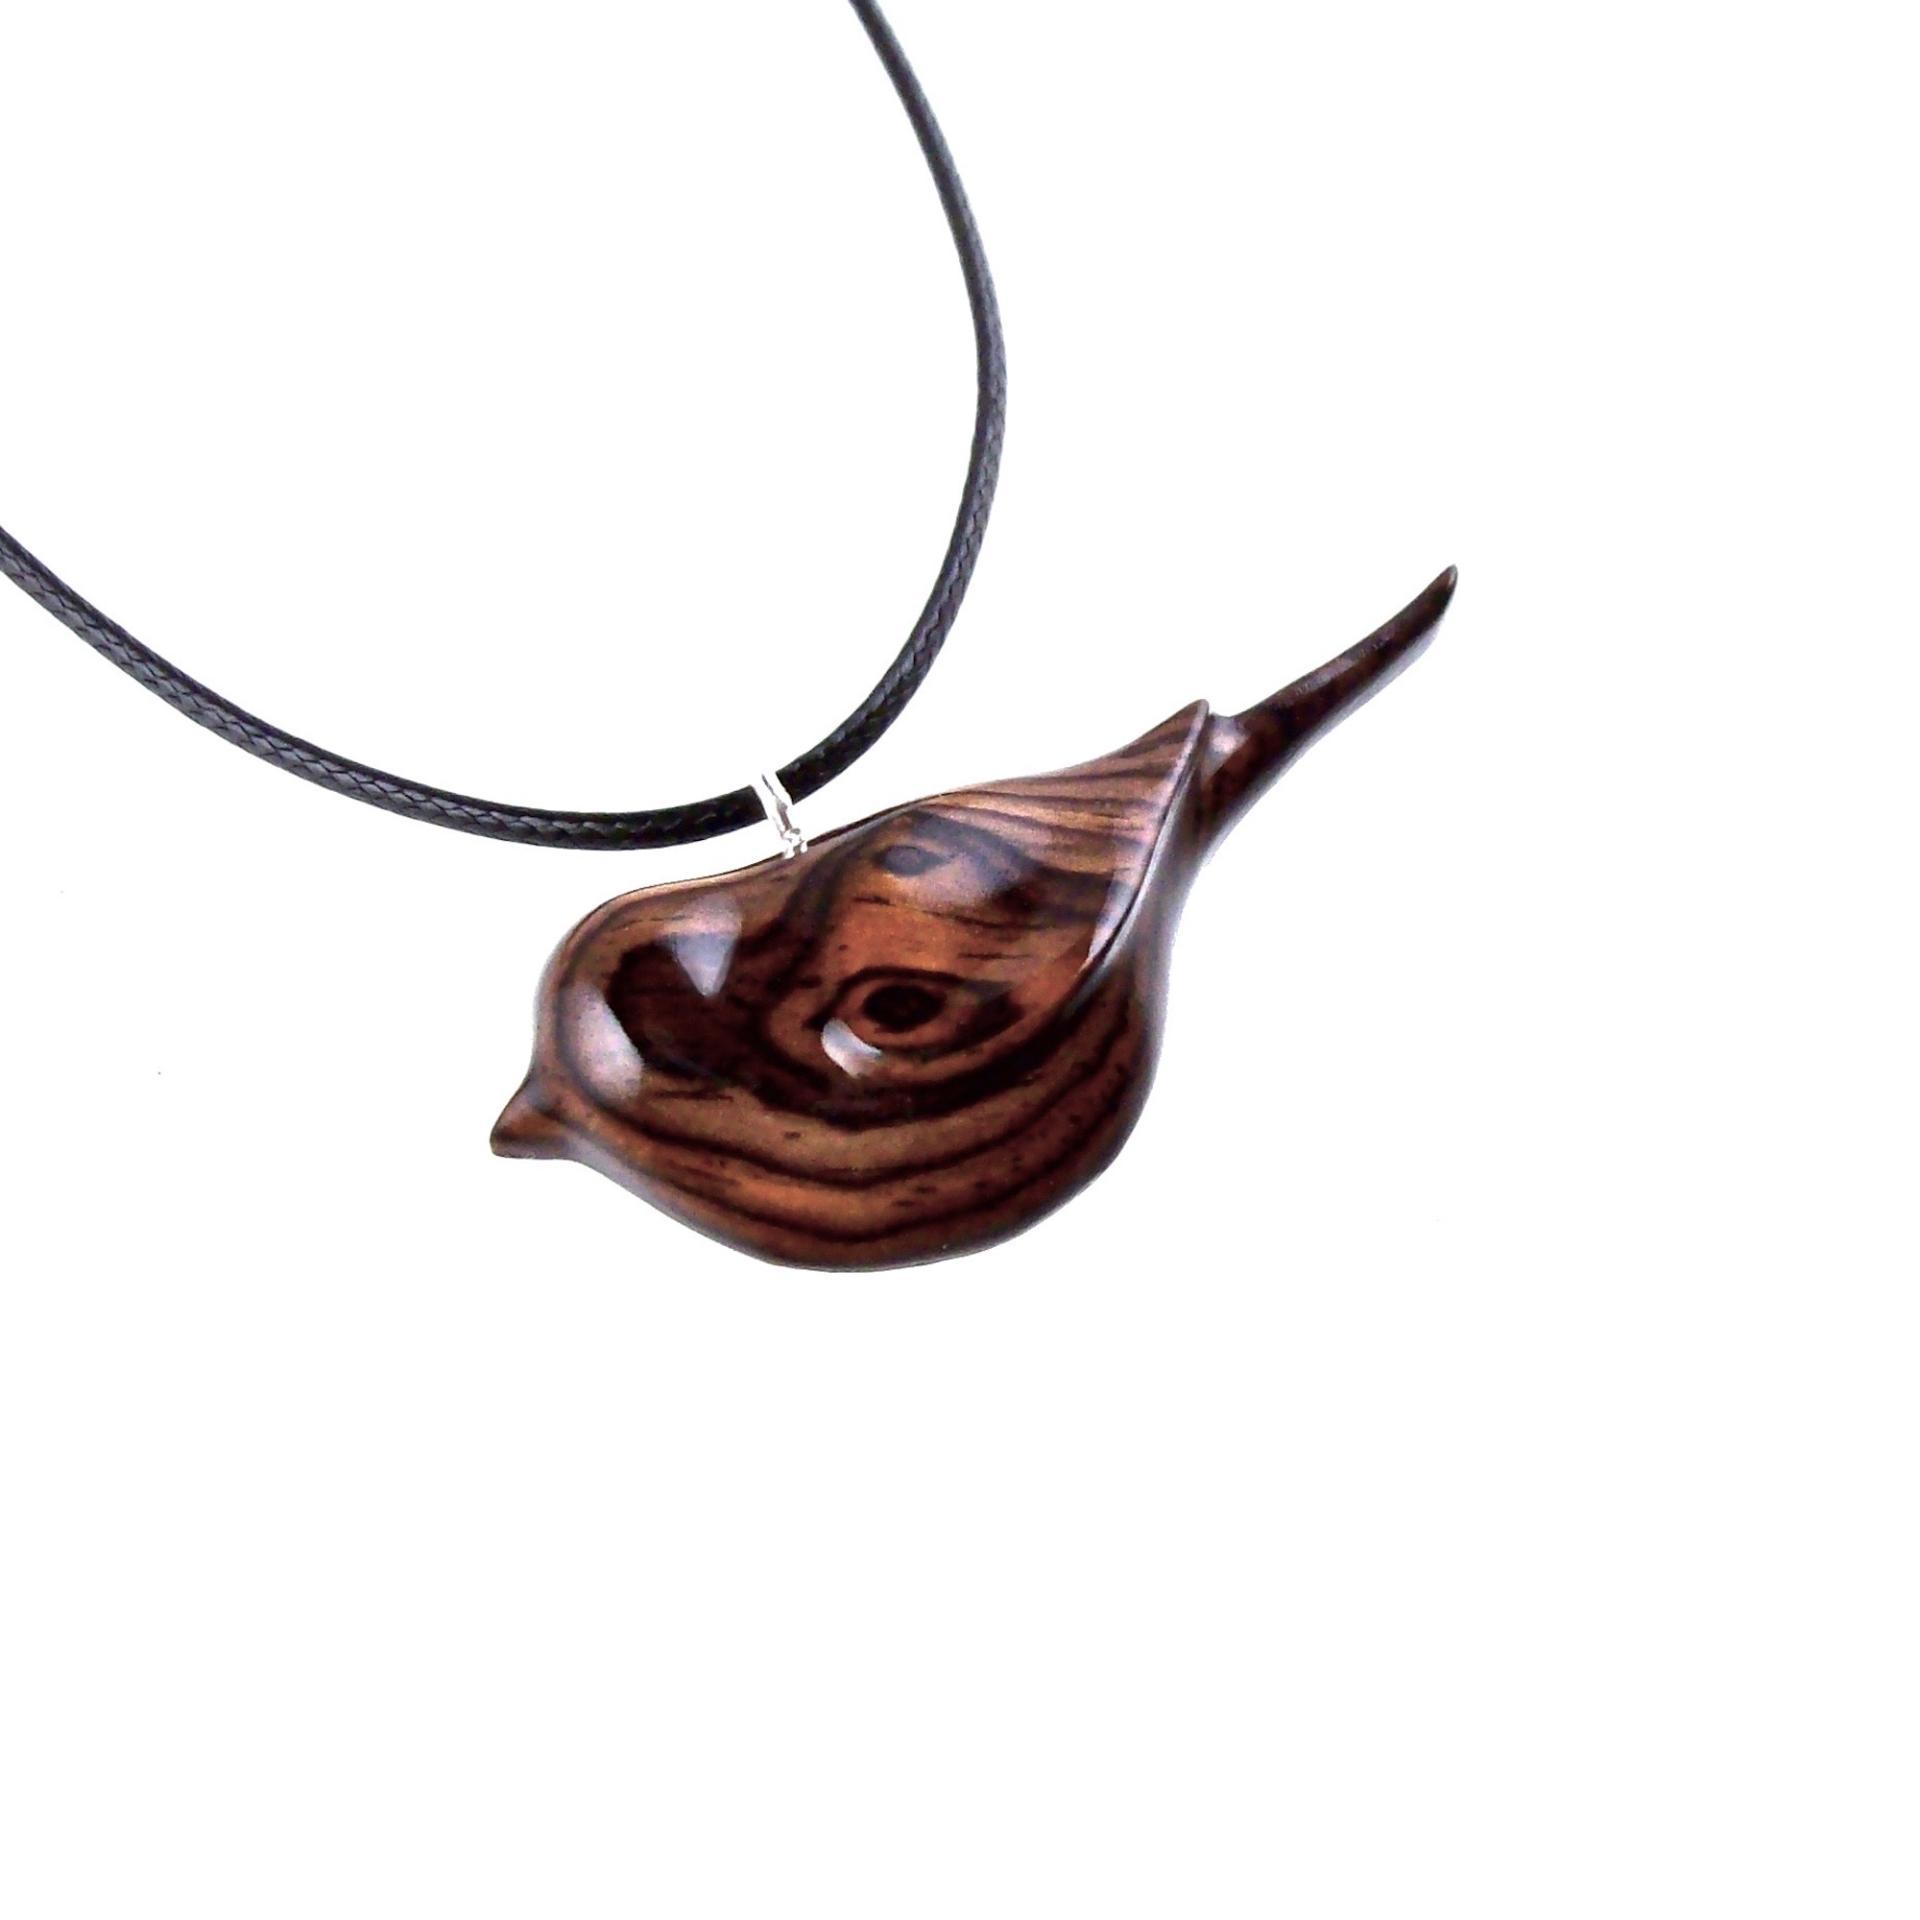 Bird Necklace, Wooden Bird Pendant, Hand Carved Chickadee Necklace, Bird Jewelry, One of a Kind Gift for Her, Wood Jewelry